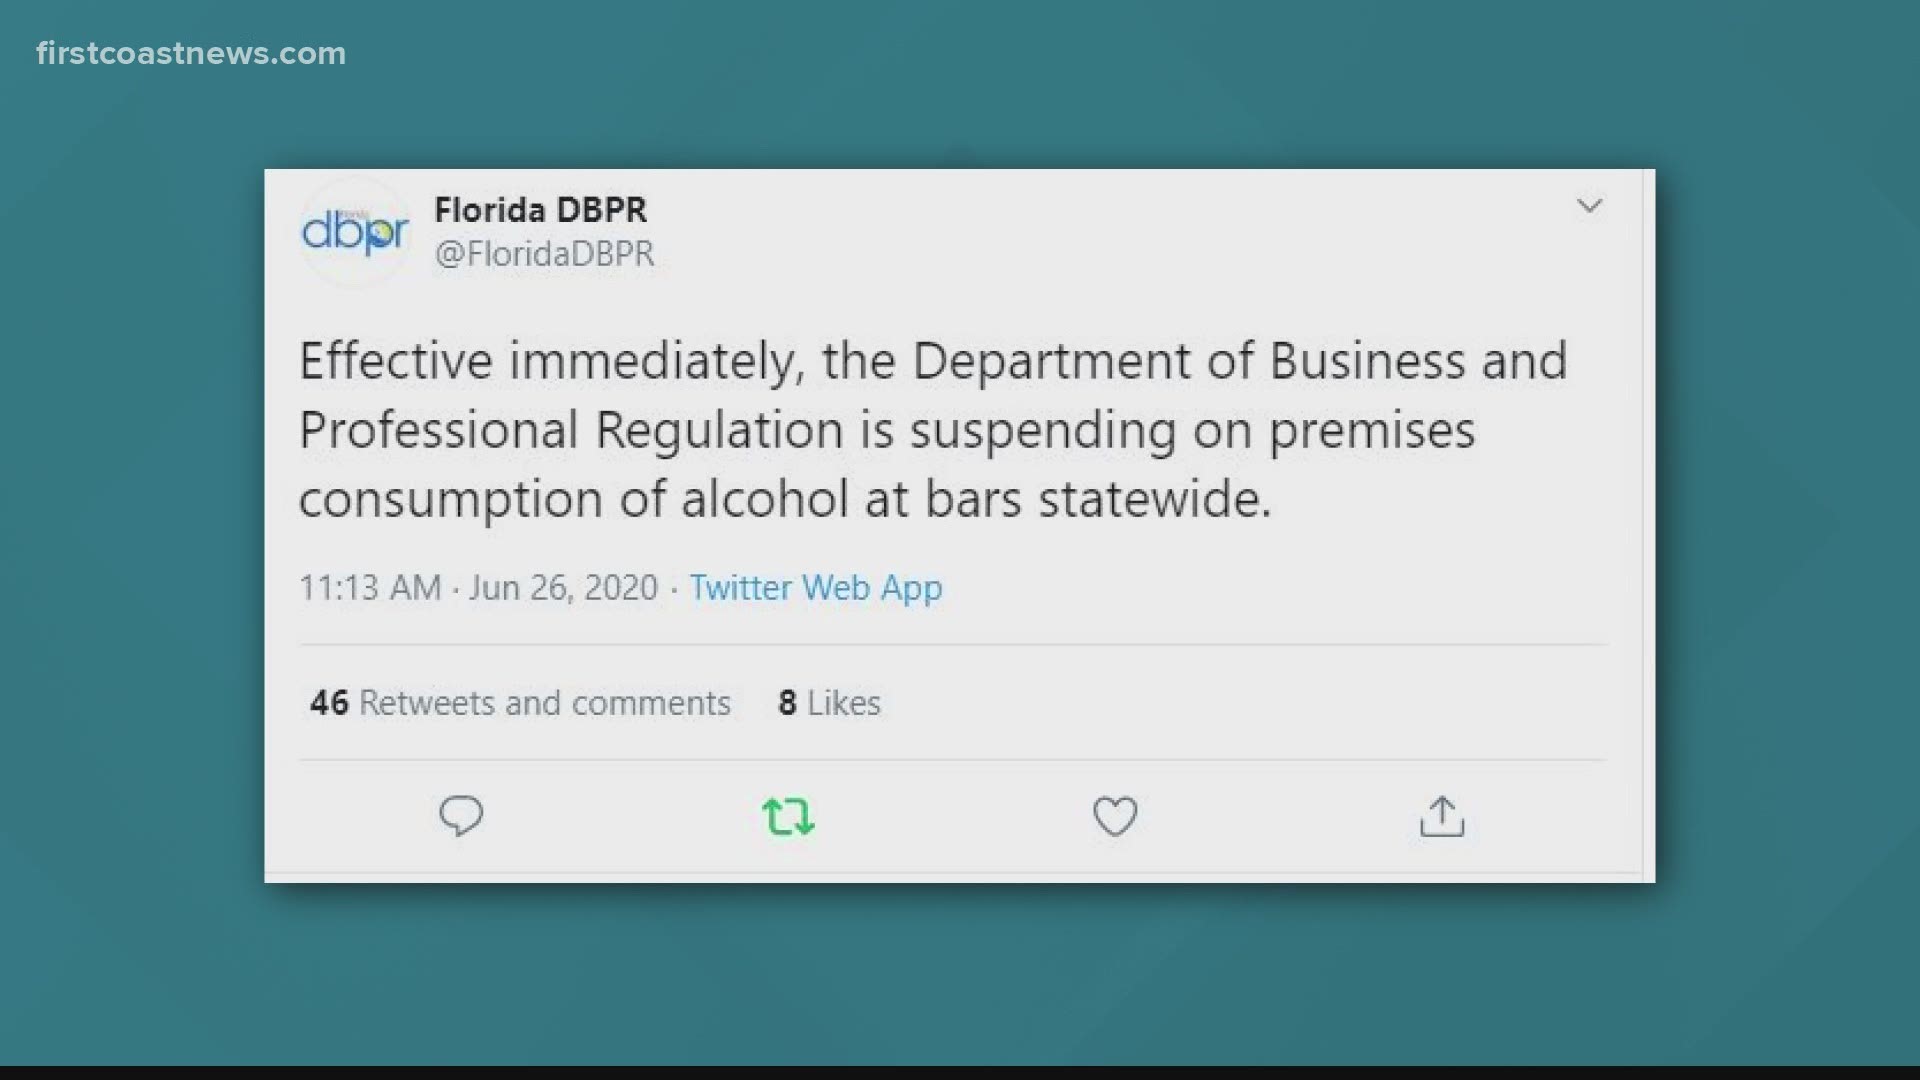 "Effective immediately, the Department of Business and Professional Regulation is suspending on premises consumption of alcohol at bars statewide."